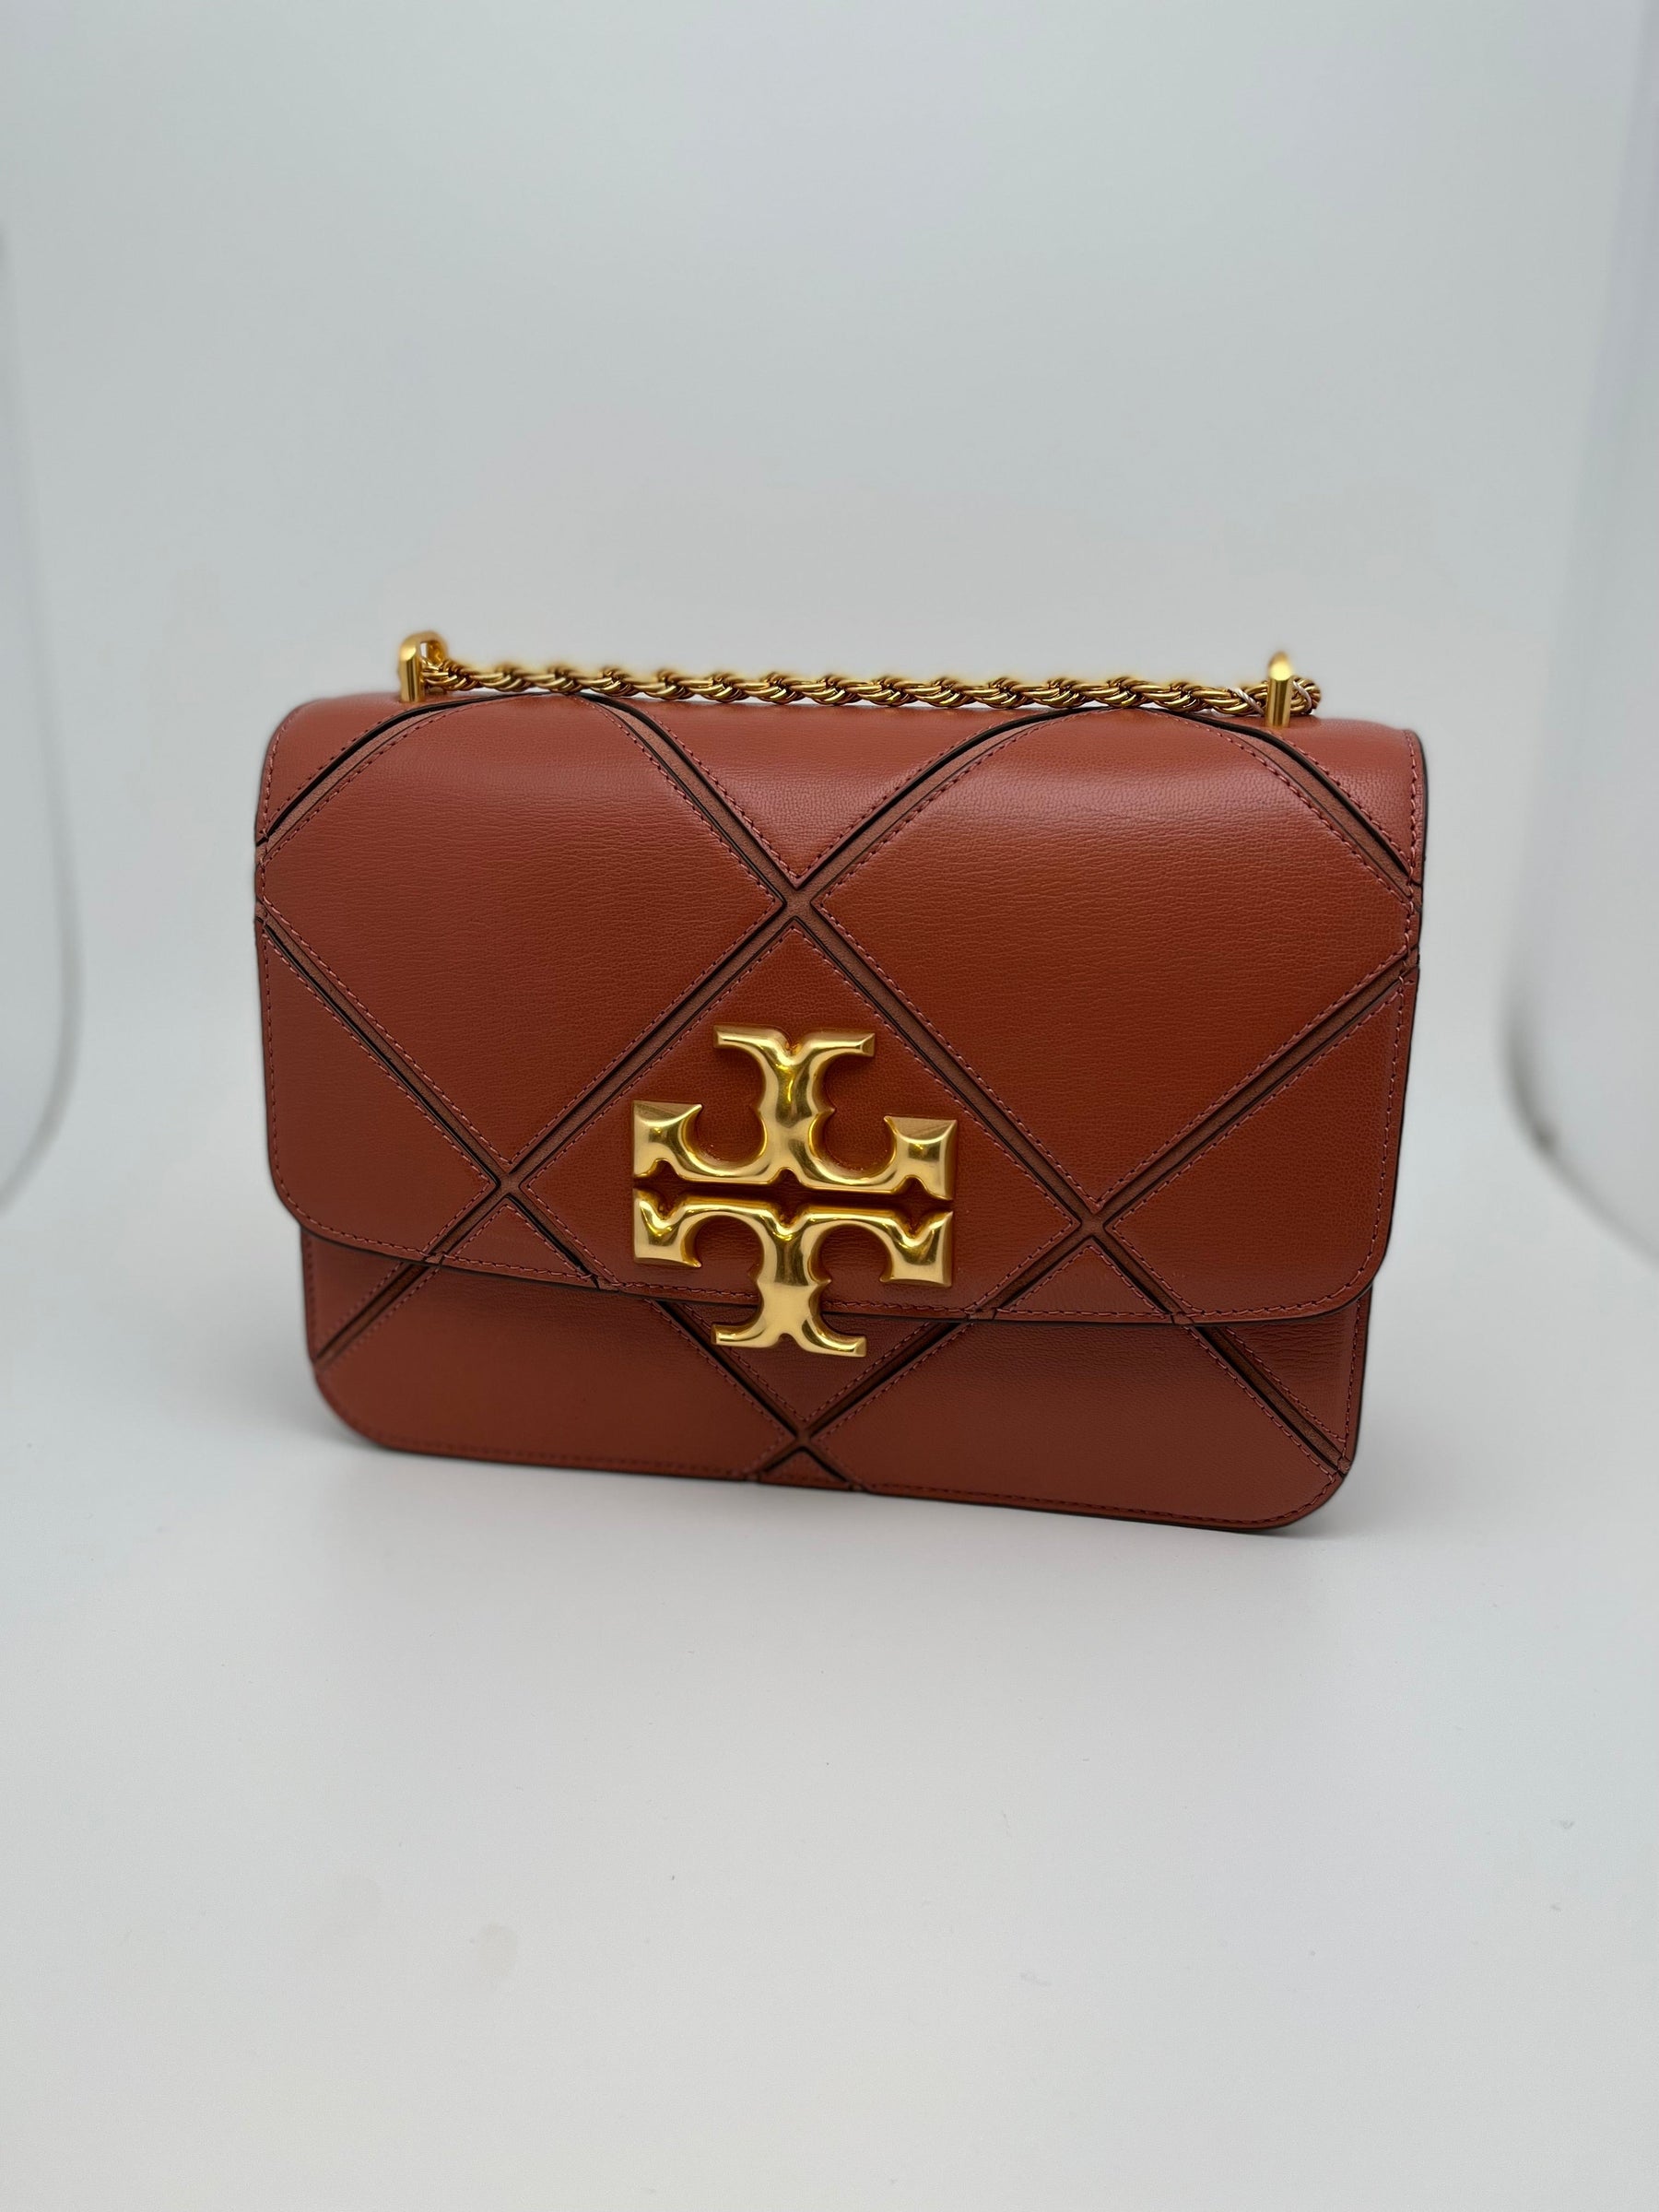 Tory Burch Eleanor Diamond Shoulder Bag with leather and gold toned hardware. Interior pockets and snap closure. New with tags